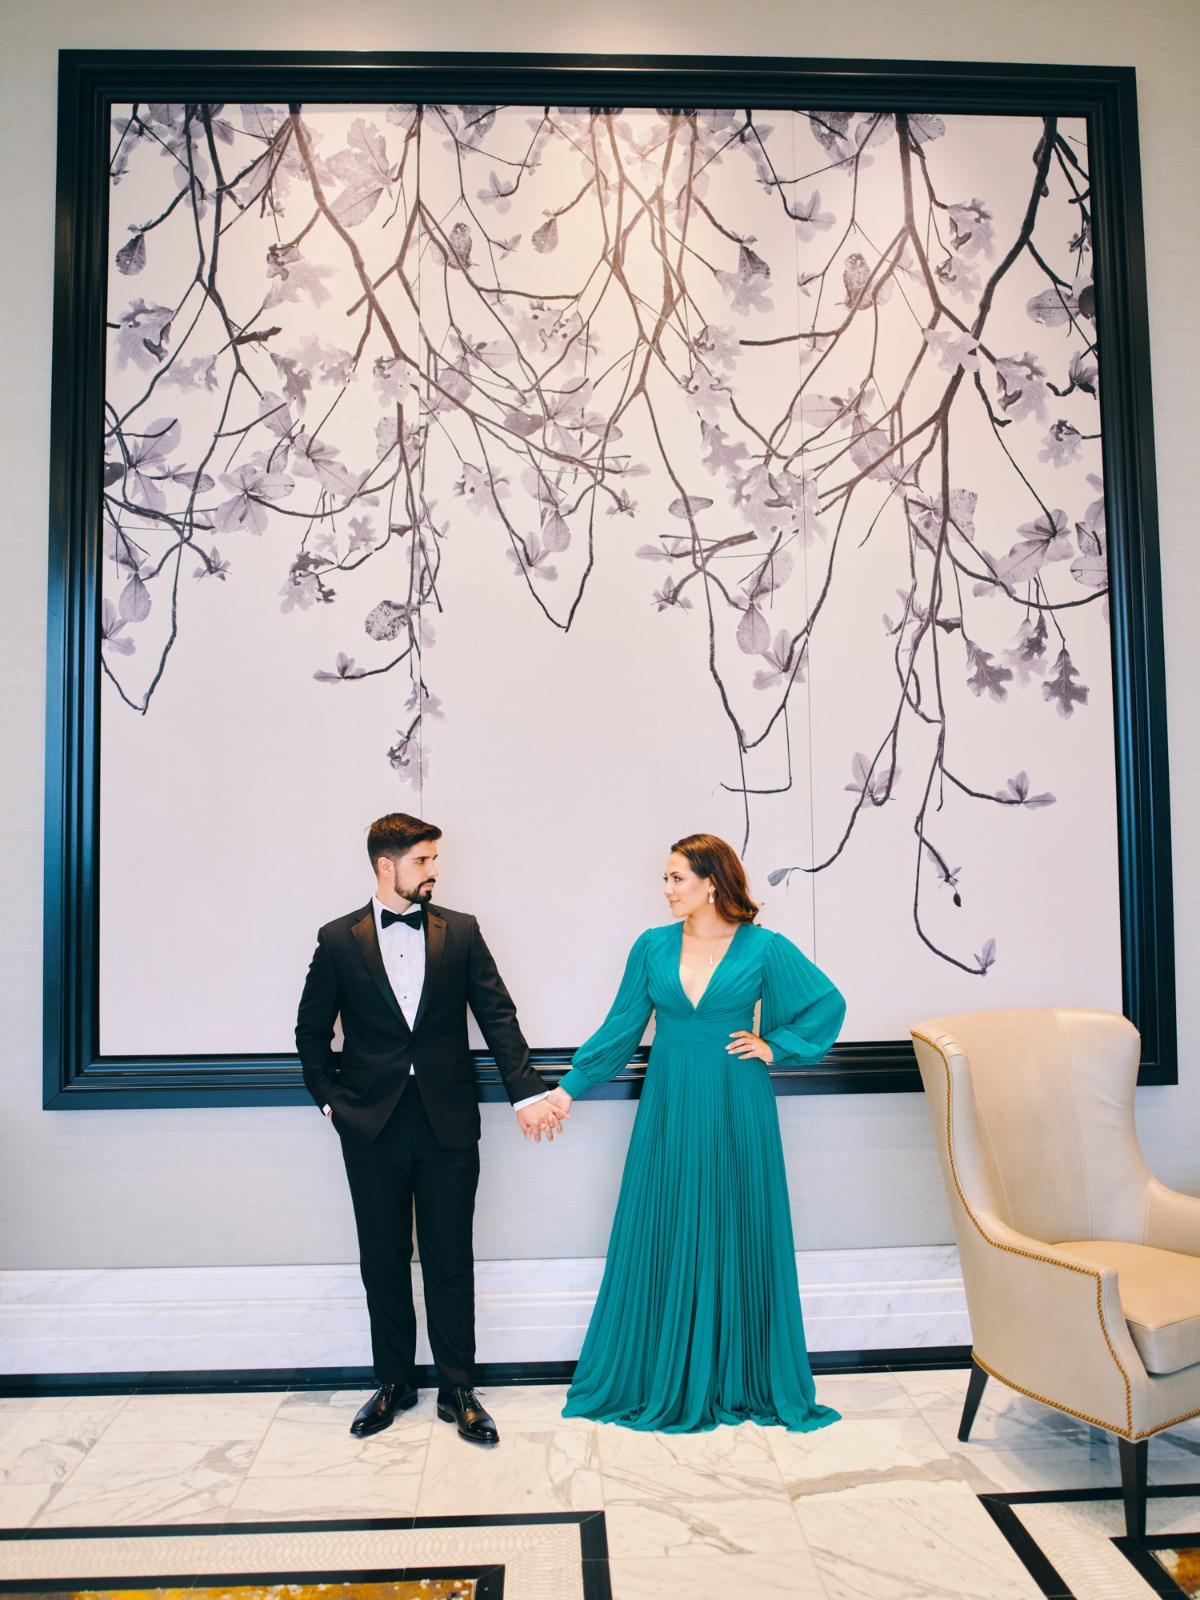 Post Oak Hotel at Uptown Houston Engagement Session Feature